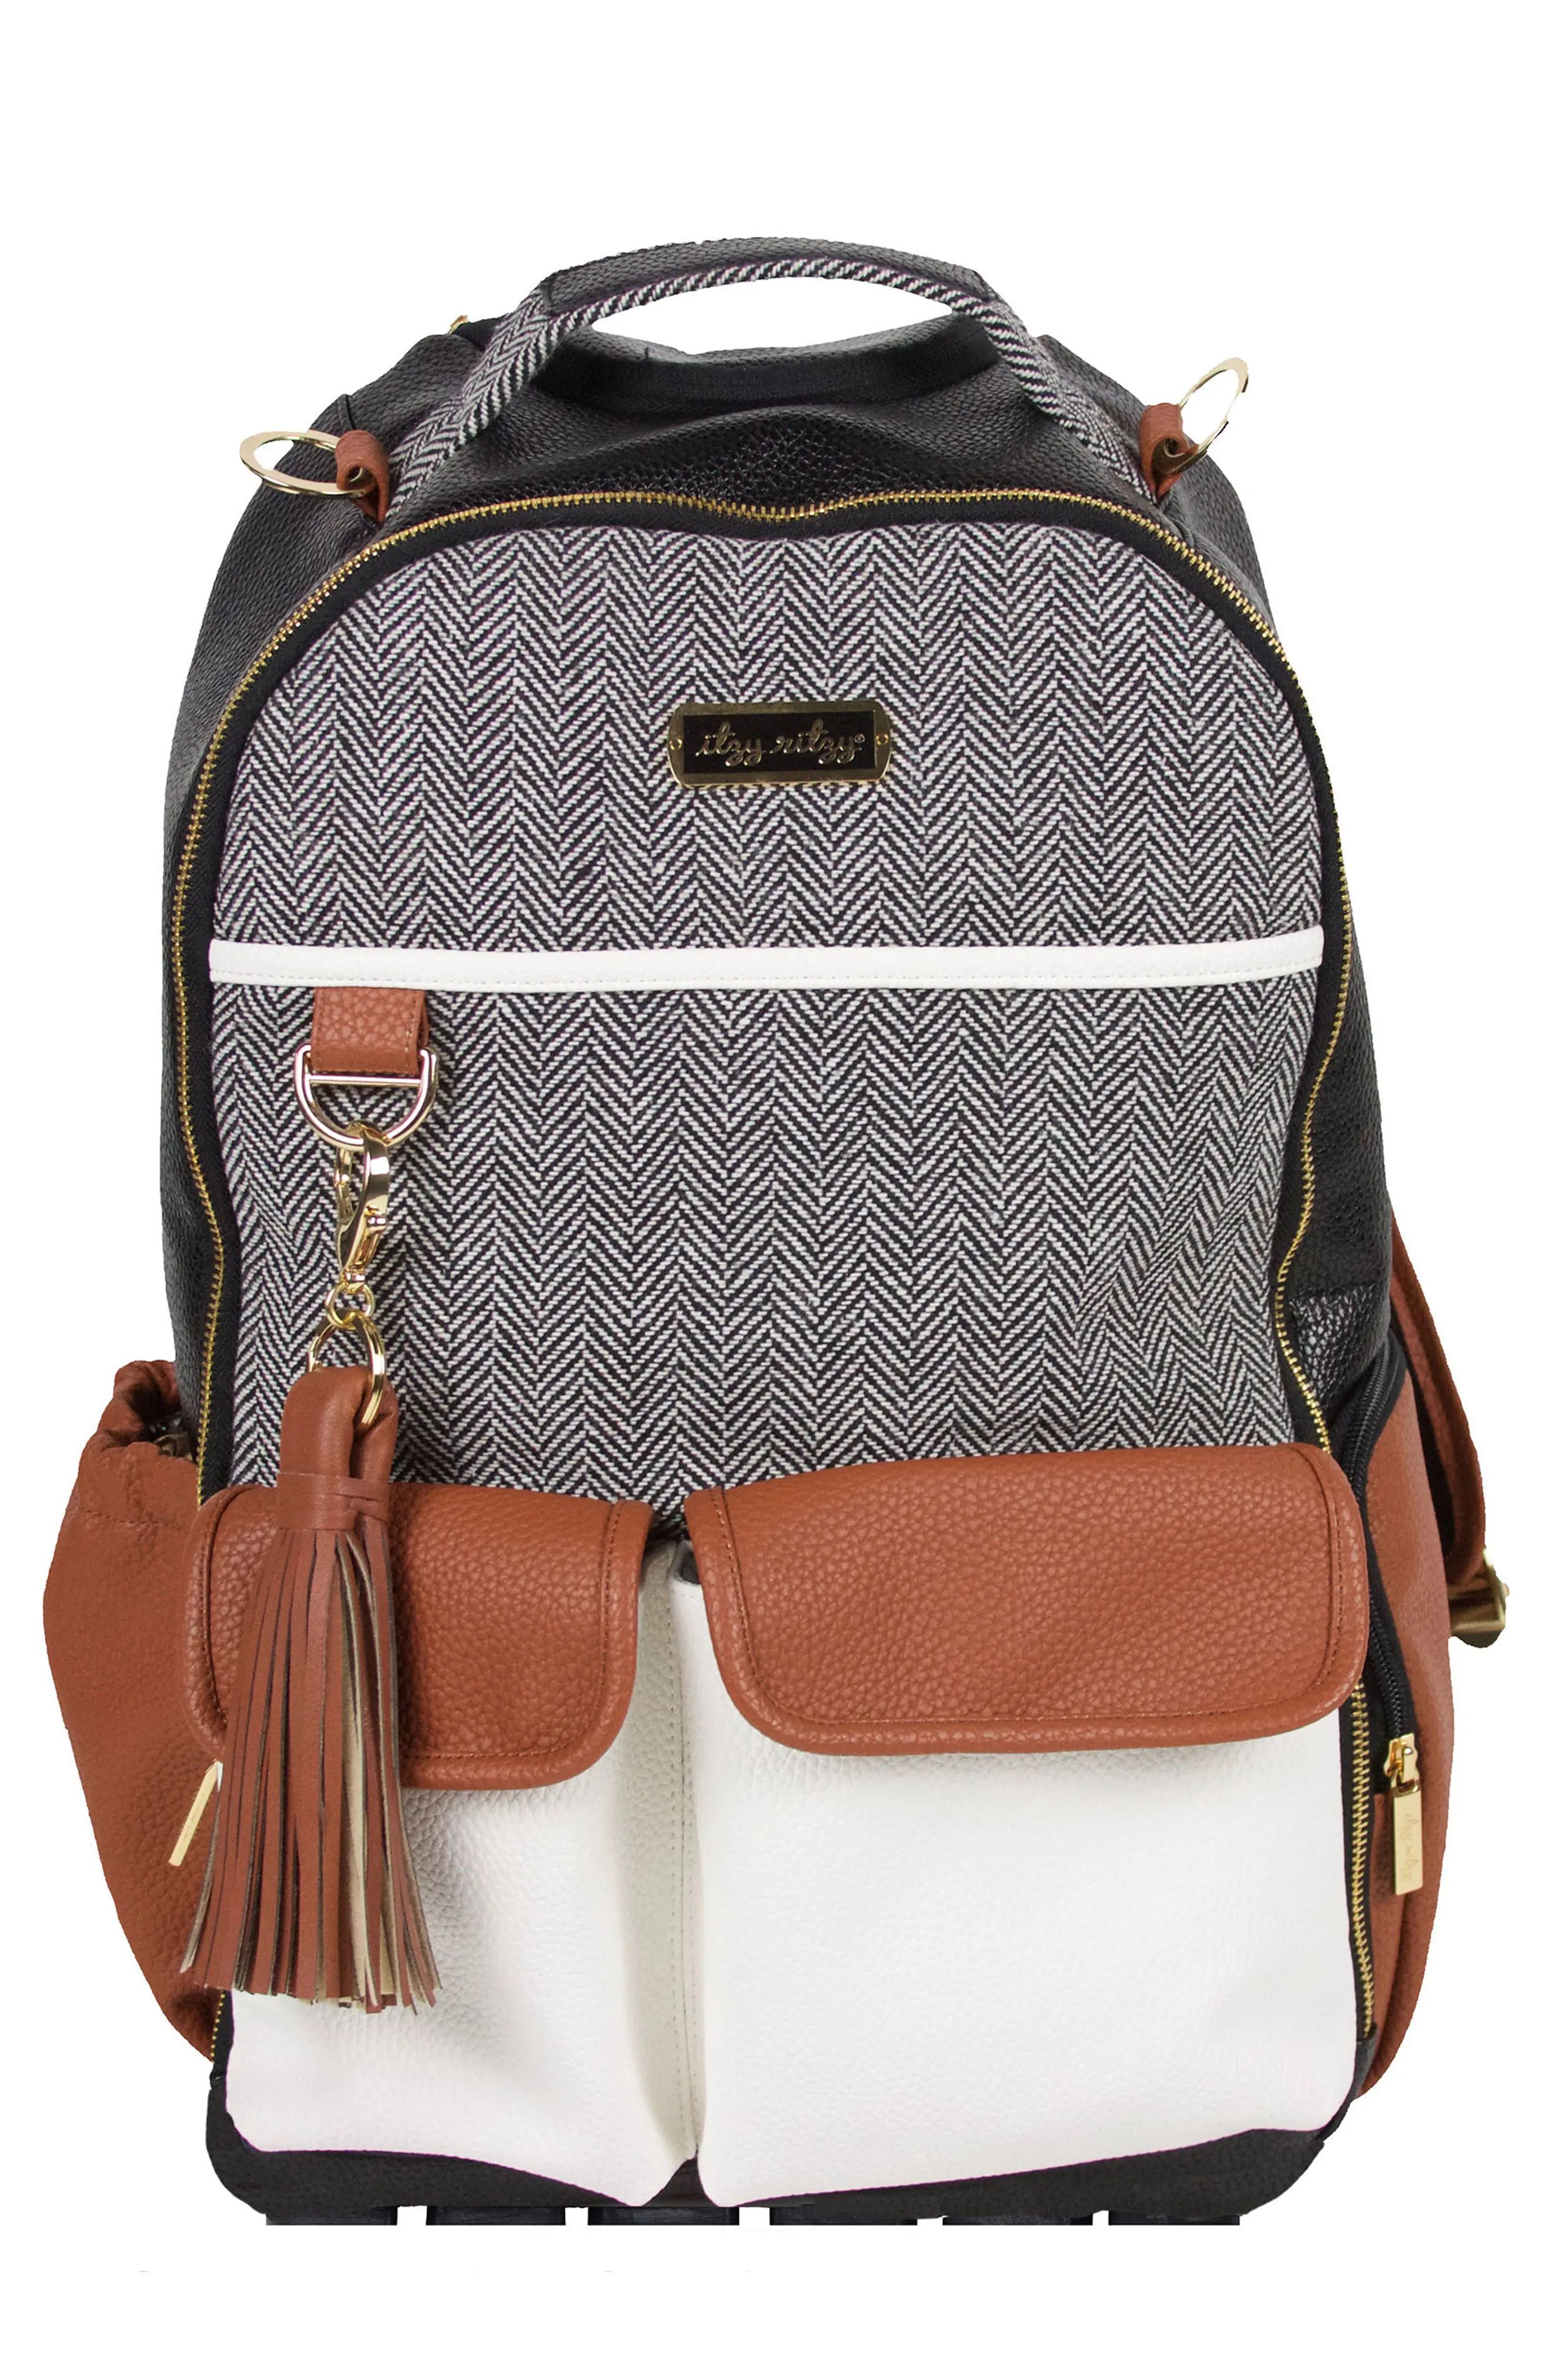 Itzy Ritzy Diaper Bag Backpack in Coffee And Cream at Nordstrom | Nordstrom